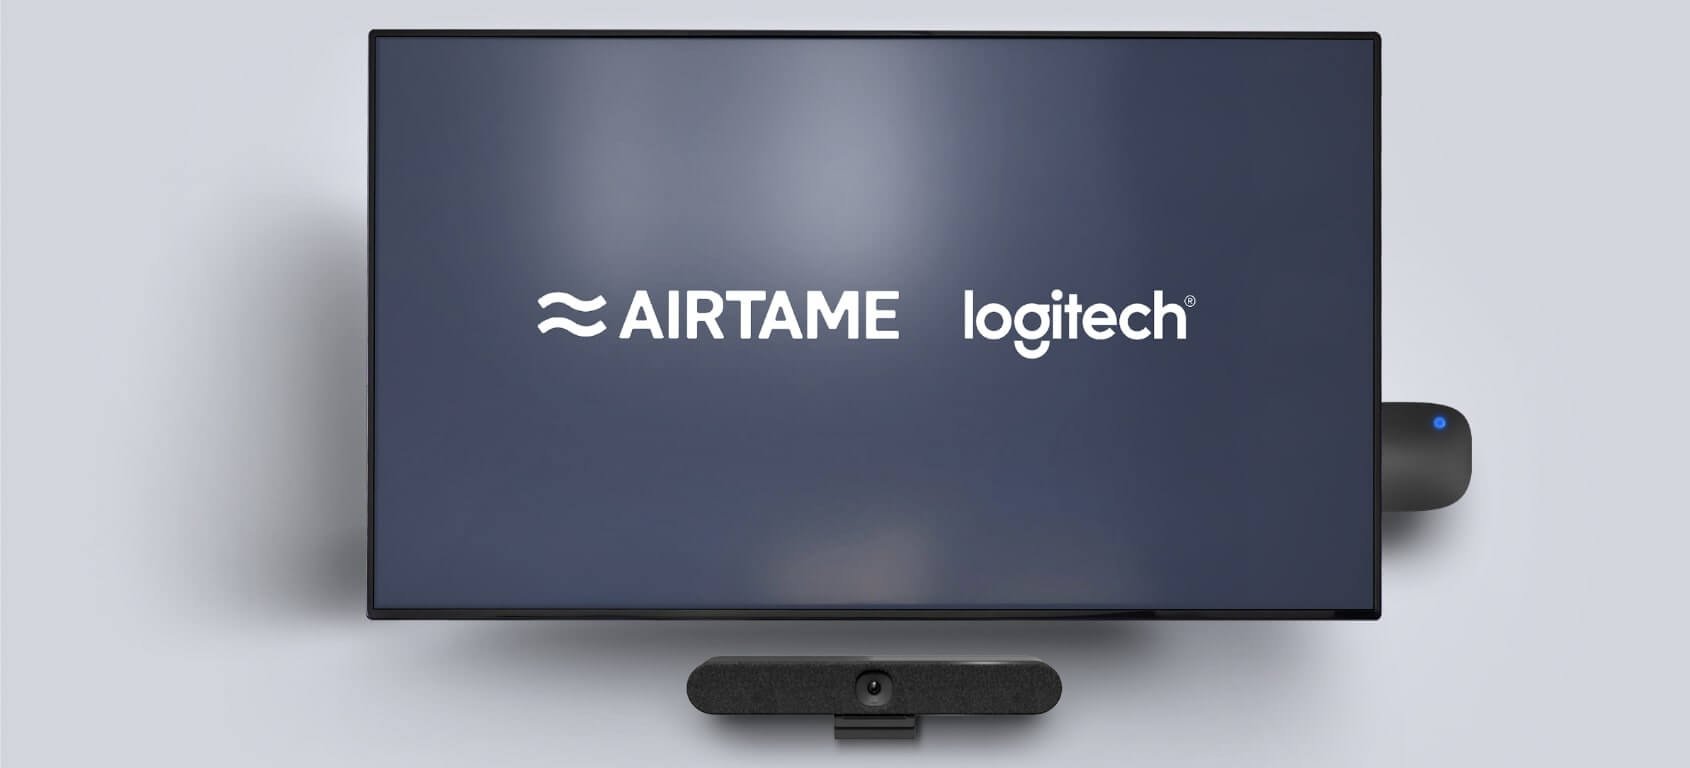 Airtame enters into a strategic alliance with Logitech to enhance the future of hybrid meetings